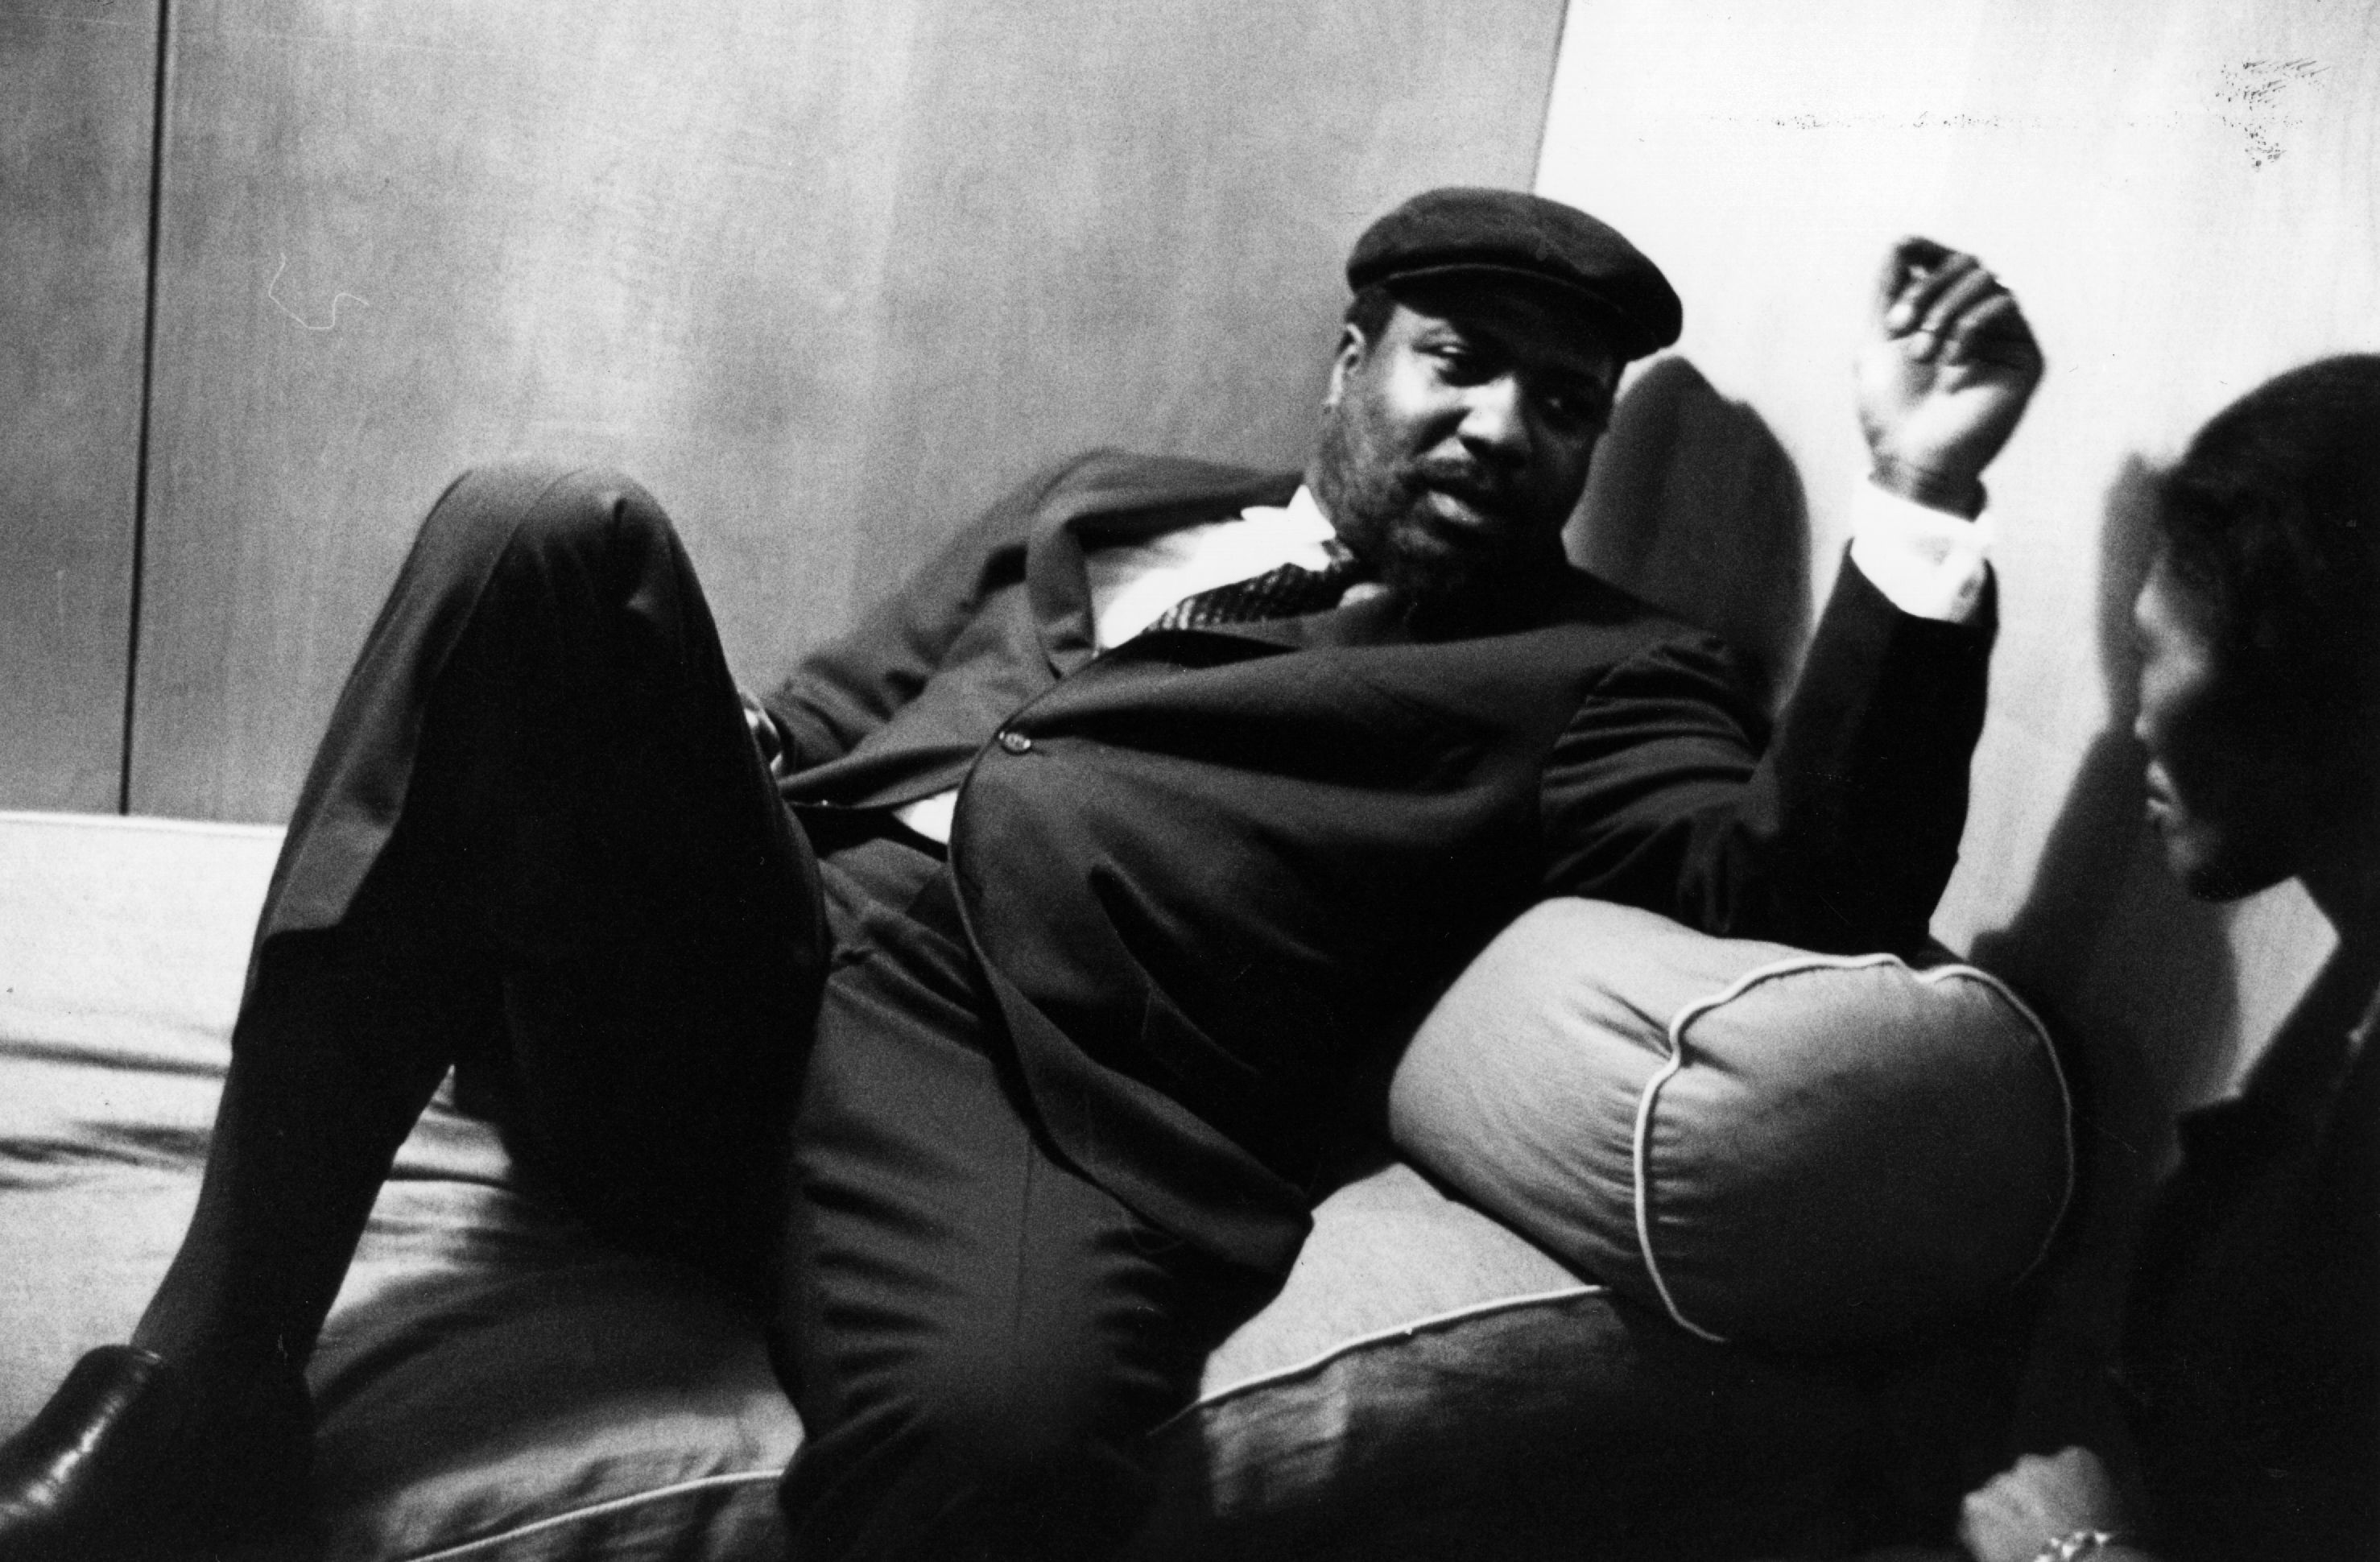 Remembering Thelonious Monk